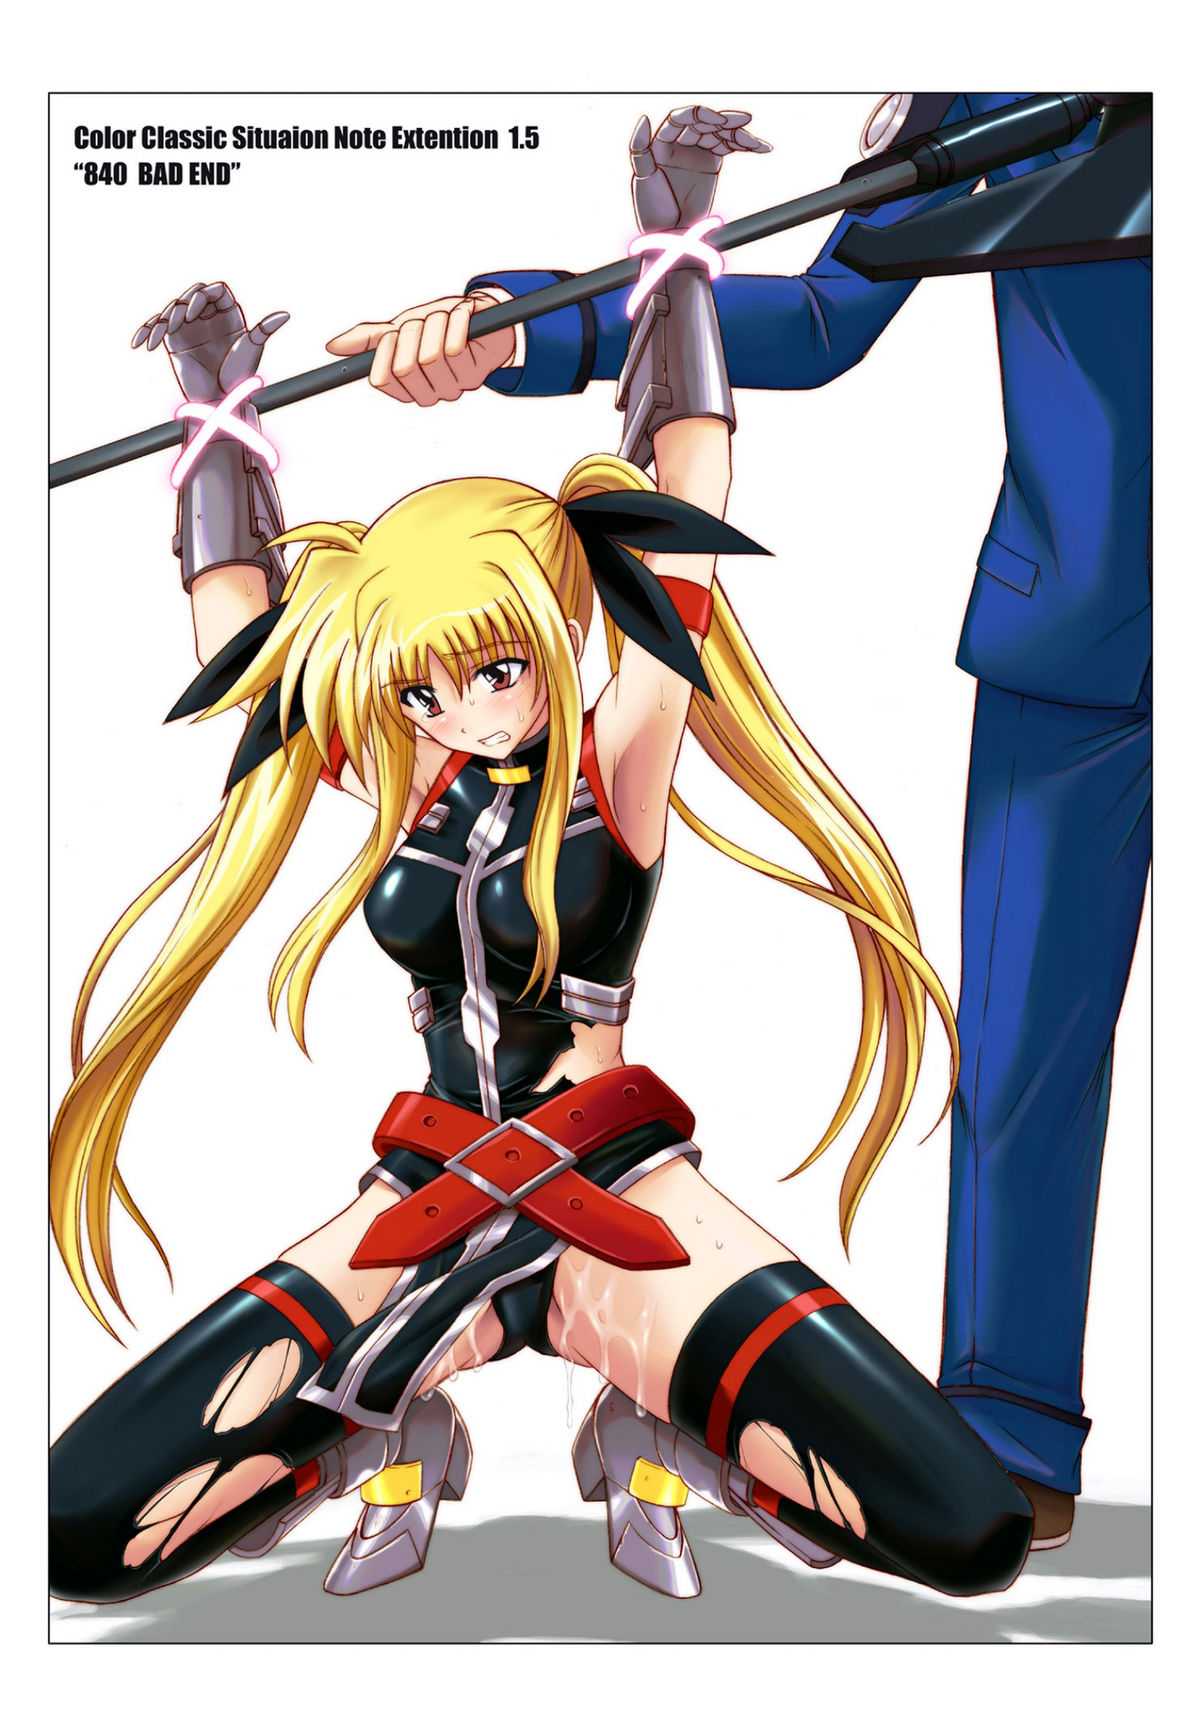 (C74) [CYCLONE (Izumi Kazuya)] 840 BAD END -Color Classic Situation Note Extention 1.5- (Mahou Shoujo Lyrical Nanoha) [Digital] [Colored] [Portuguese-BR] (C74) [サイクロン (和泉和也)] 840 BAD END -Color Classic Situation Note Extention 1.5- (魔法少女リリカルなのは) [デジタル版] [カラー]